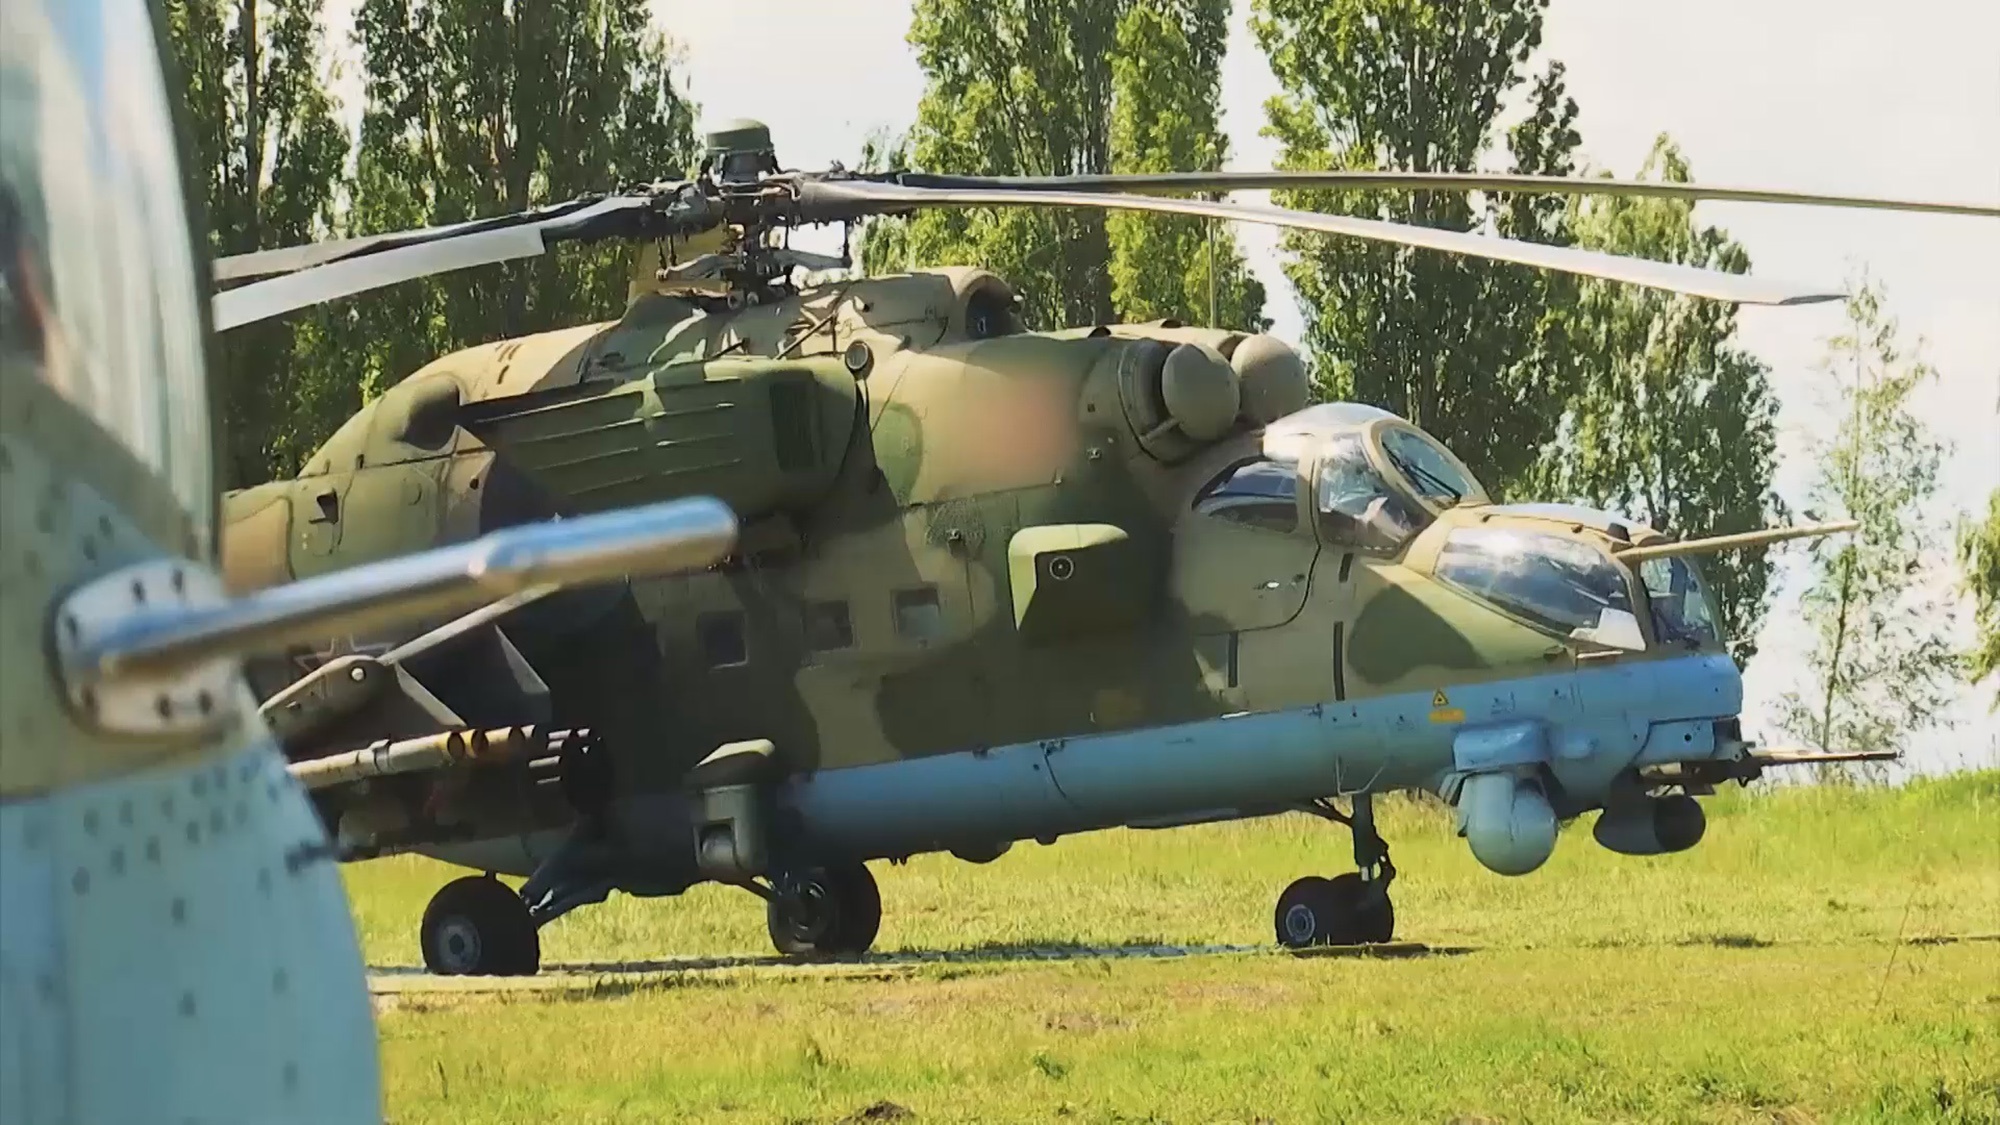 Read more about the article WAR IN UKRAINE: Russian Attack Helicopter Destroys Ukrainian Armoured Vehicles And Military Infrastructure